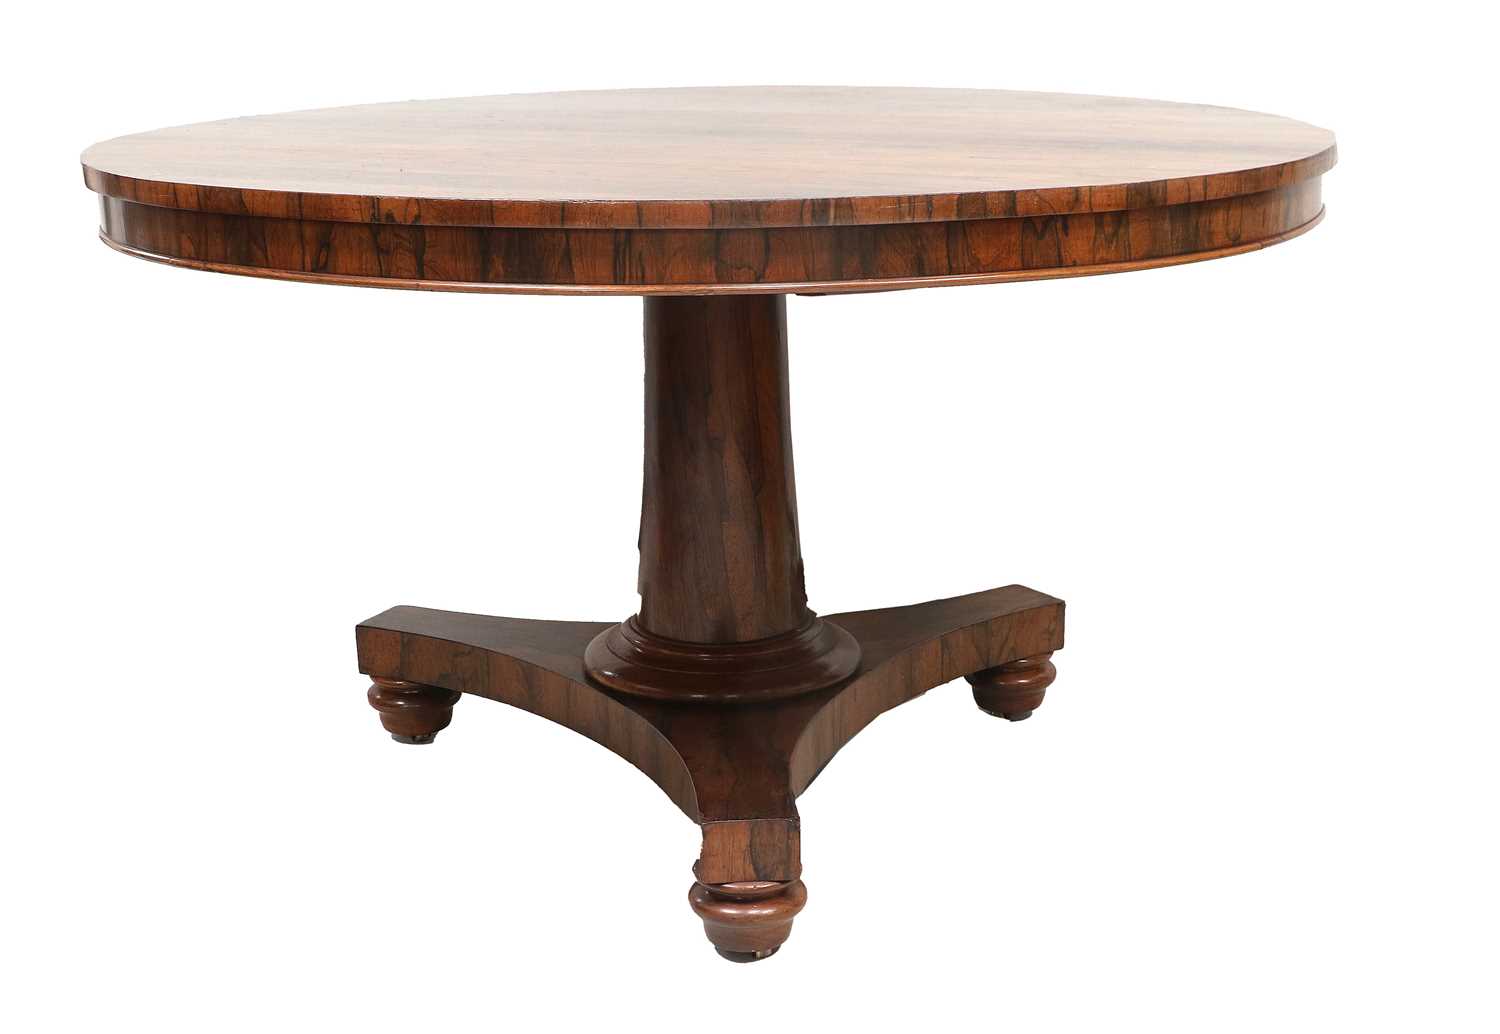 A William IV Rosewood Circular Dining Table, 2nd quarter 19th century, the flip-top on a column